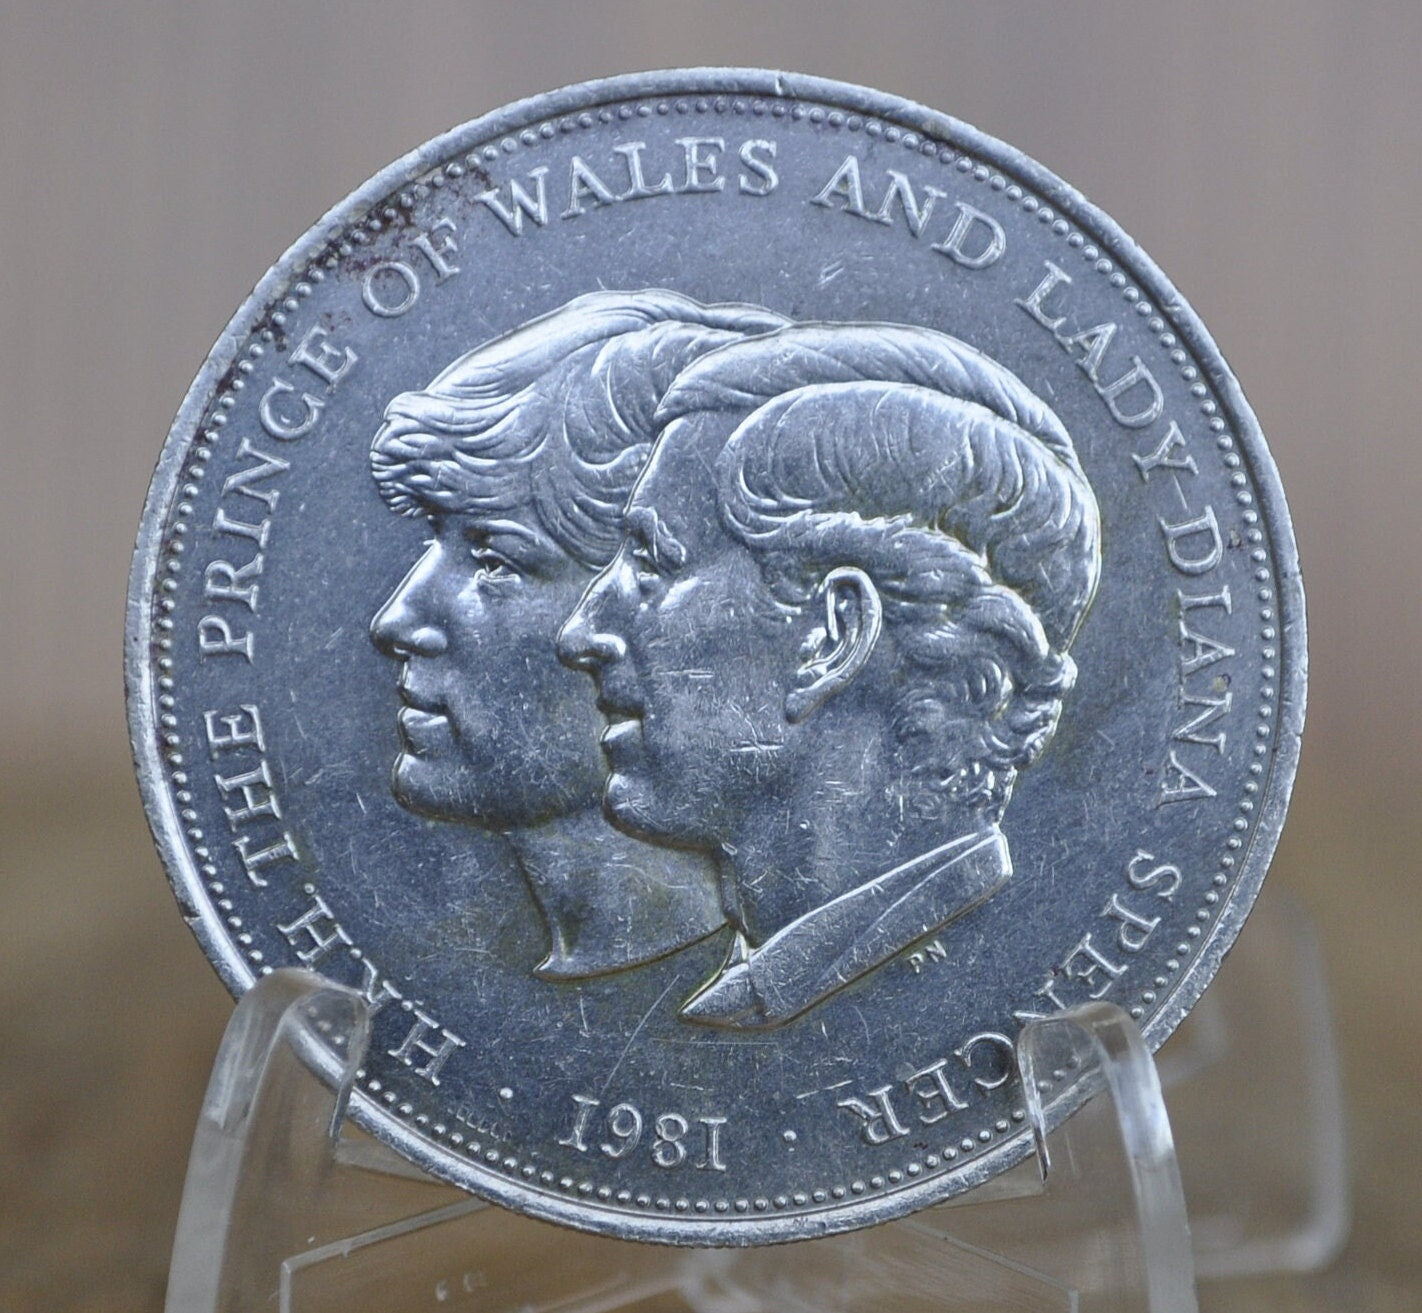 1981 UK Commemorative Prince Charles of Wales and Princess Diana Wedding Coin. 25 Pence Circulated Condition - XF (Extremely Fine)